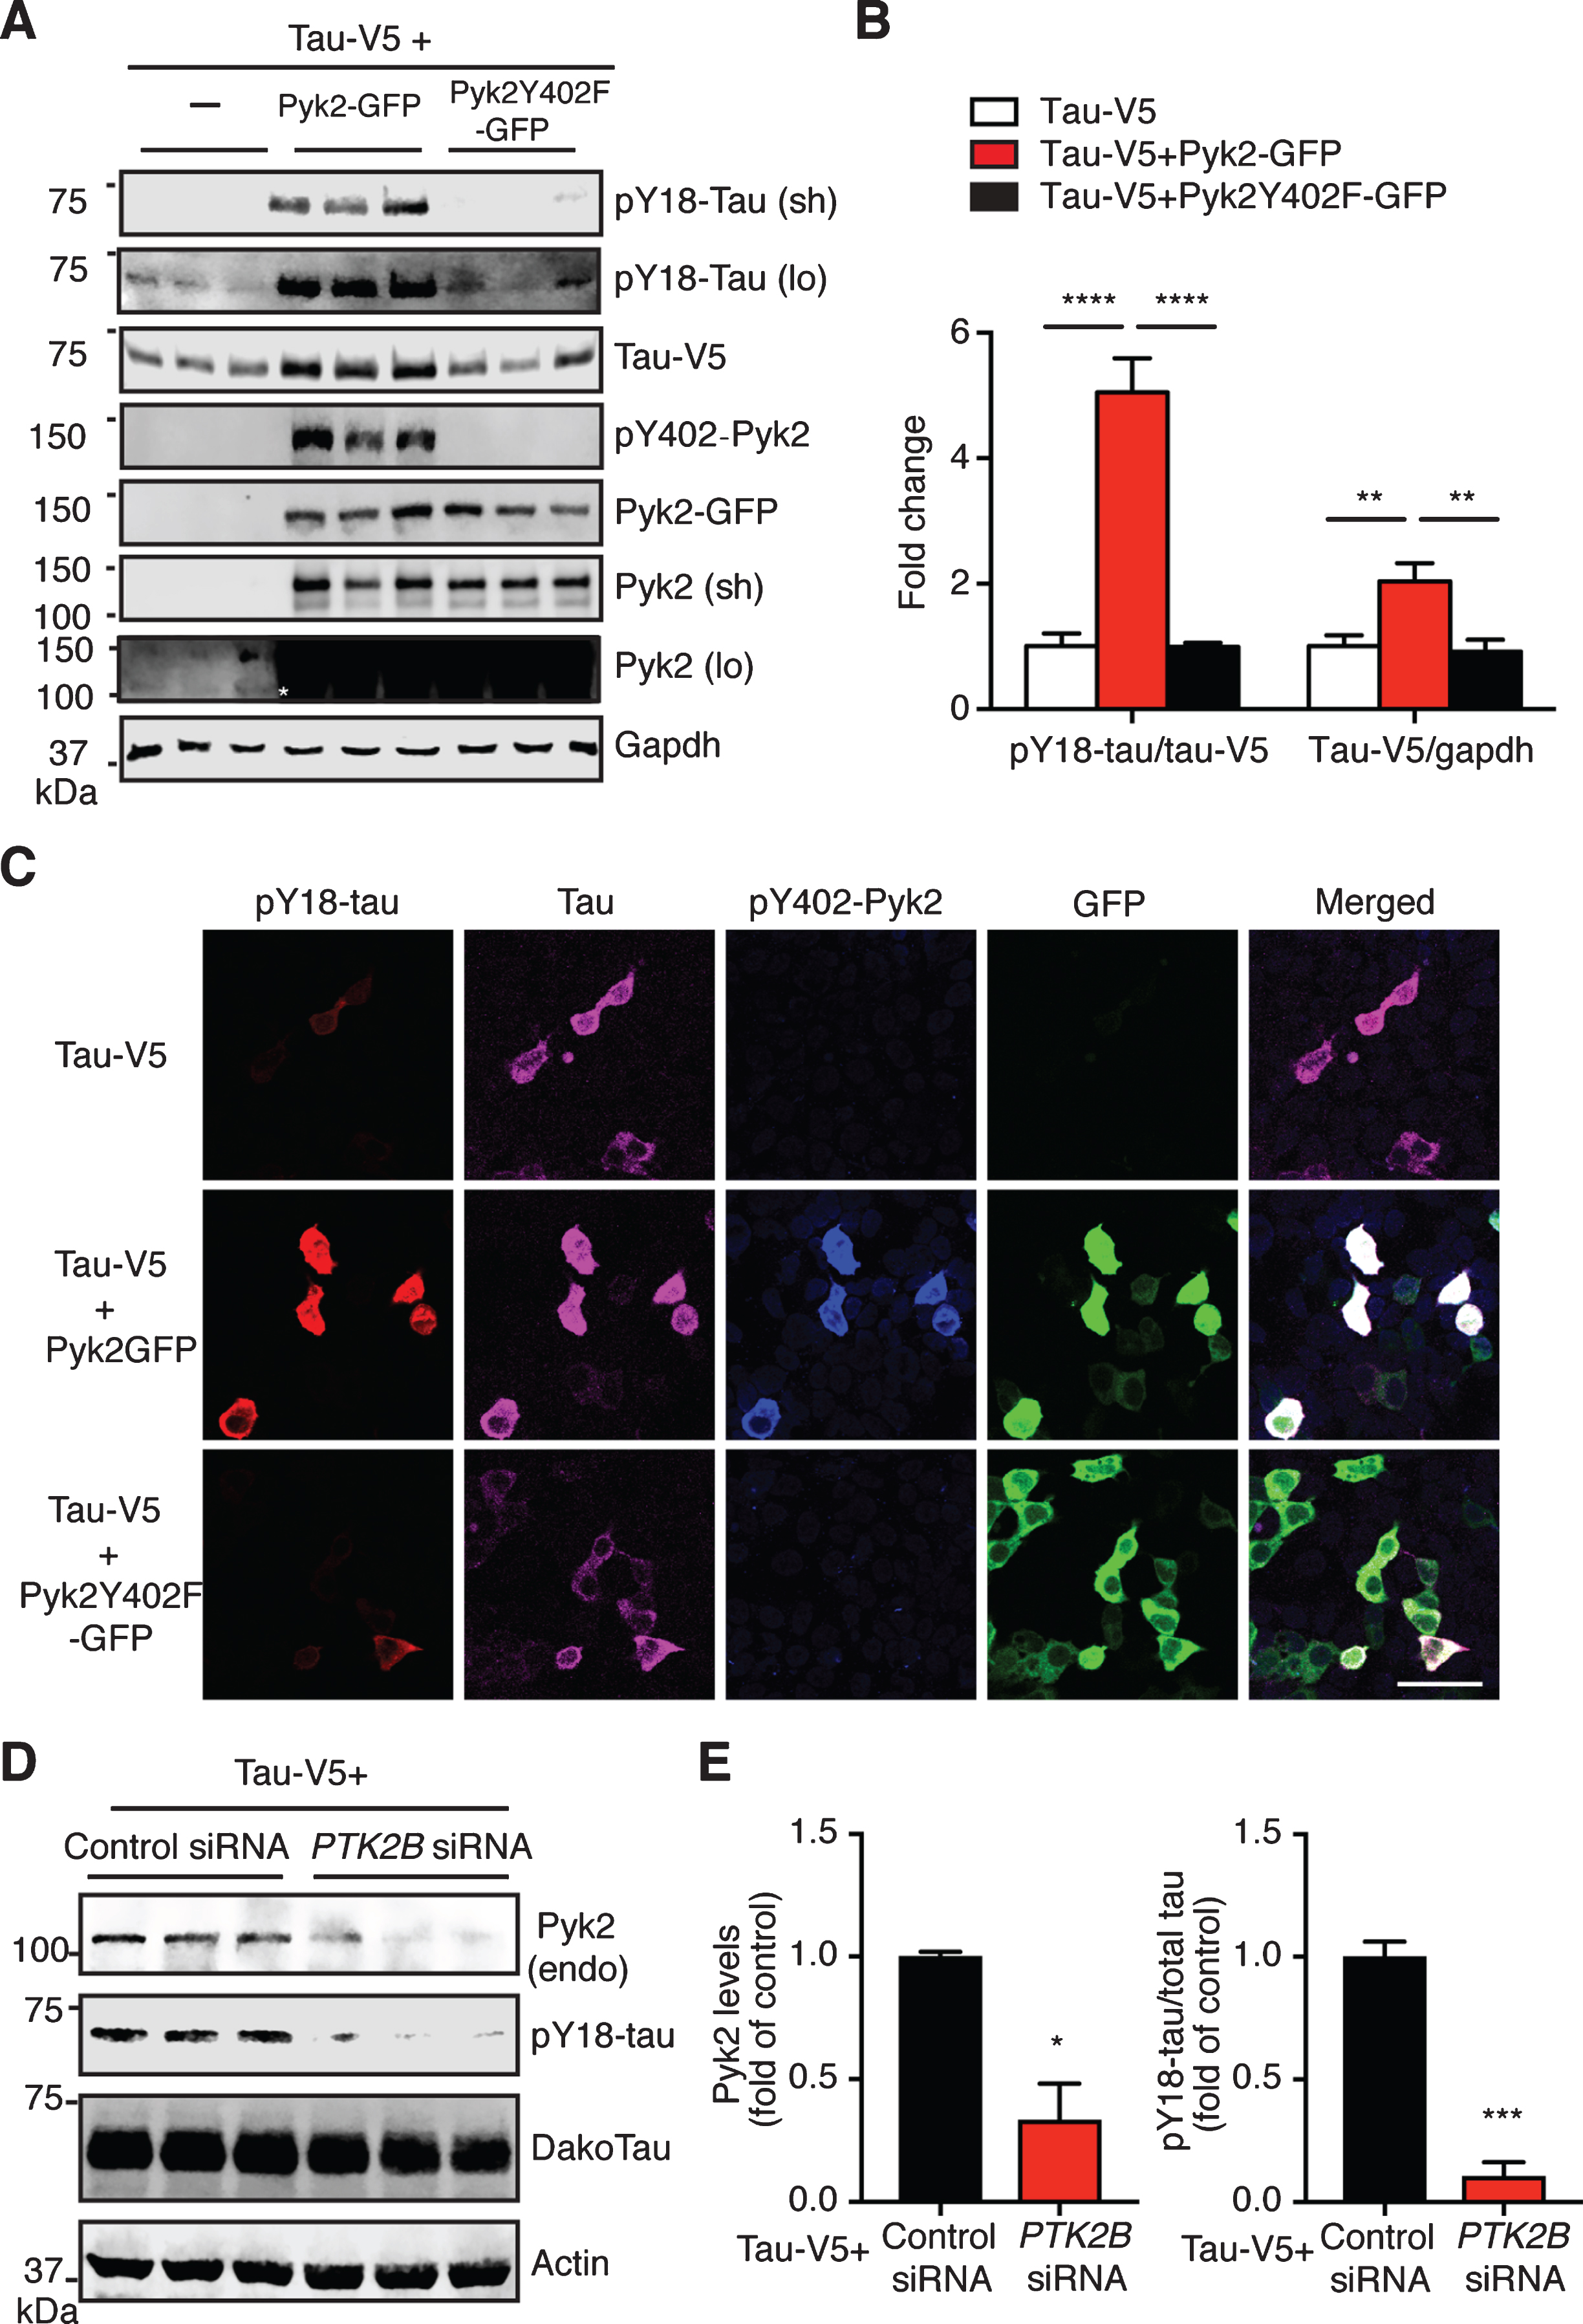 Pyk2 phosphorylates tau in HEK293T cells. A) Representative immunoblots of lysates from HEK293T cells transfected with V5-tagged tau and GFP-tagged Pyk2. Validation of the Y402F mutant form of Pyk2 by immunoblotting using a phospho-Y402-Pyk2 specific antibody. Sh, short exposure; lo, long exposure. Asterisk denotes the endogenous expression of Pyk2 in HEK cells using a longer exposure of the immunoblot in the absence of Pyk2-GFP overexpression. B) Quantification of immunoblots in (A) showing relative tau and pY18-tau levels. Mean±s.e.m, n = 6 per group, one-way ANOVA, Dunnett’s multiple comparisons test, **p < 0.01, ****p < 0.0001. C) Representative immunofluorescence staining of HEK293T cells transfected with V5-tagged tau and GFP-tagged Pyk2 indicating a strong positive correlation of pY18-tau immunoreactivity and expression of the active form of Pyk2. Scale bar: 50μm. D) Immunoblots of lysates from HEK293T cells co-transfected with V5-tagged tau and PTK2B or control siRNA. E) Quantification of immunoblots in (D). Mean±s.e.m, n = 3 per group, two-tailed t test, *p < 0.05, ***p < 0.001.